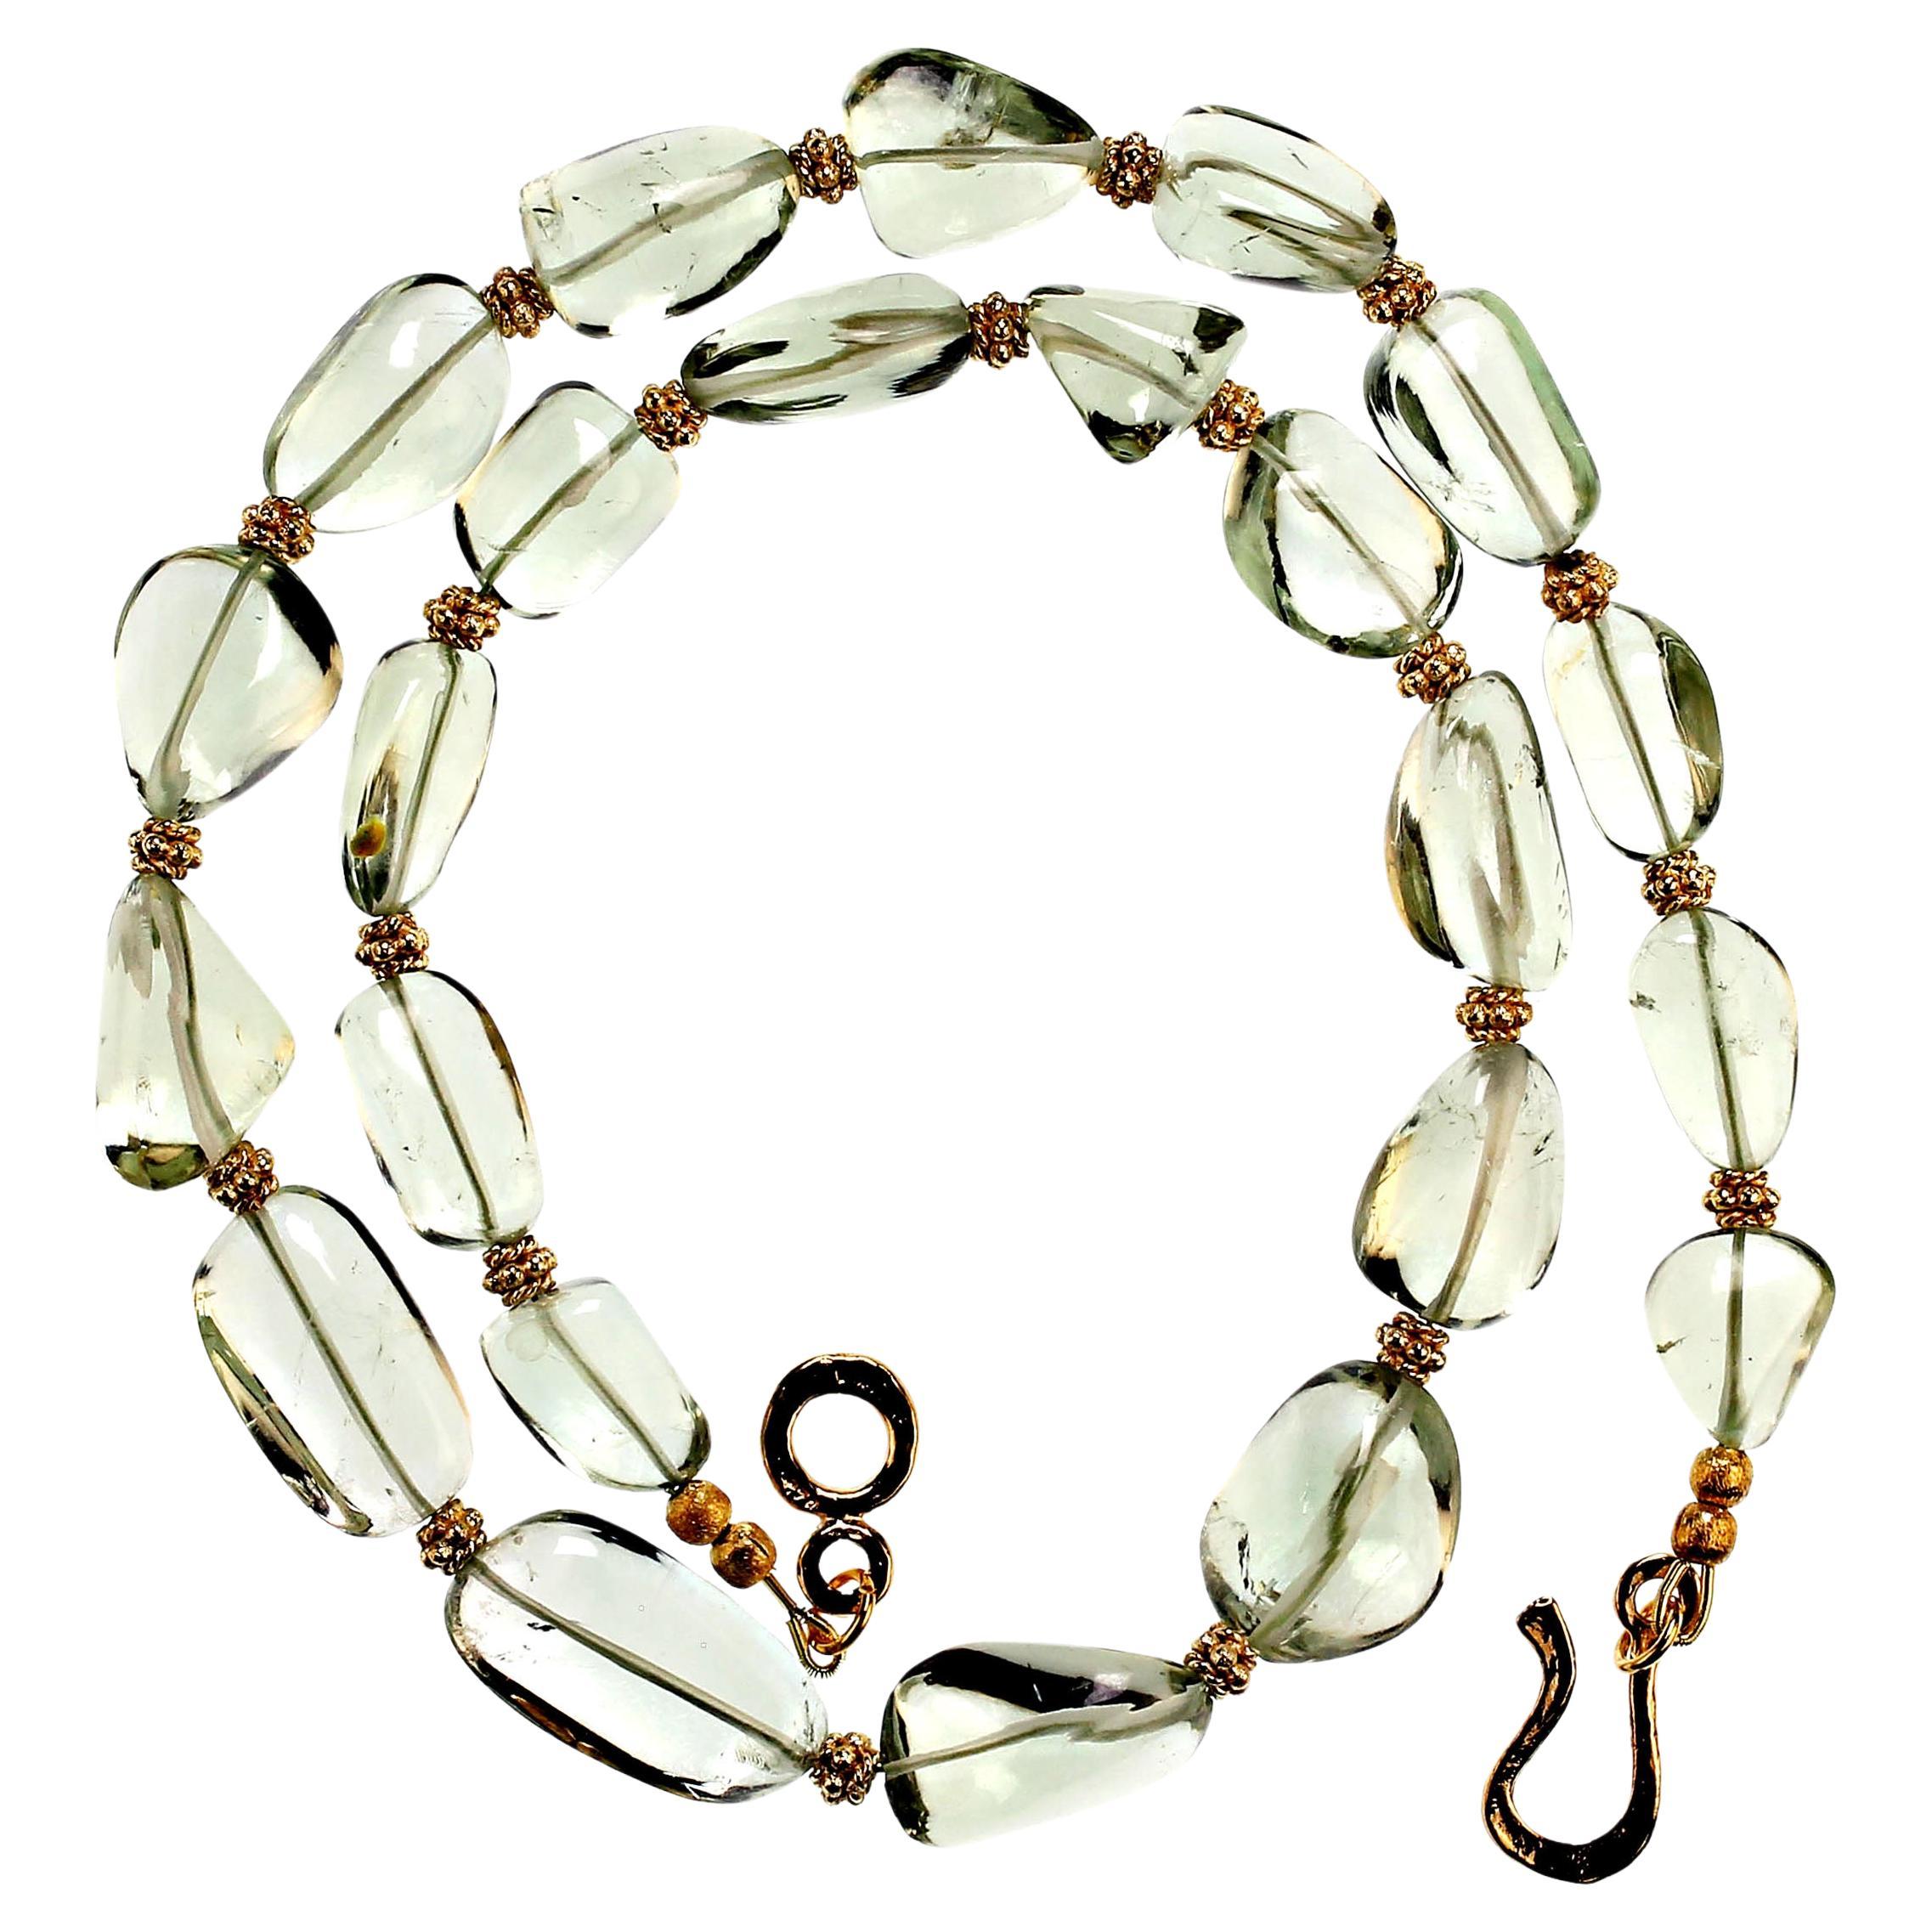 Bead AJD Elegant 22 Inch Praziolite Graduated necklace with goldy accents  Great Gift For Sale